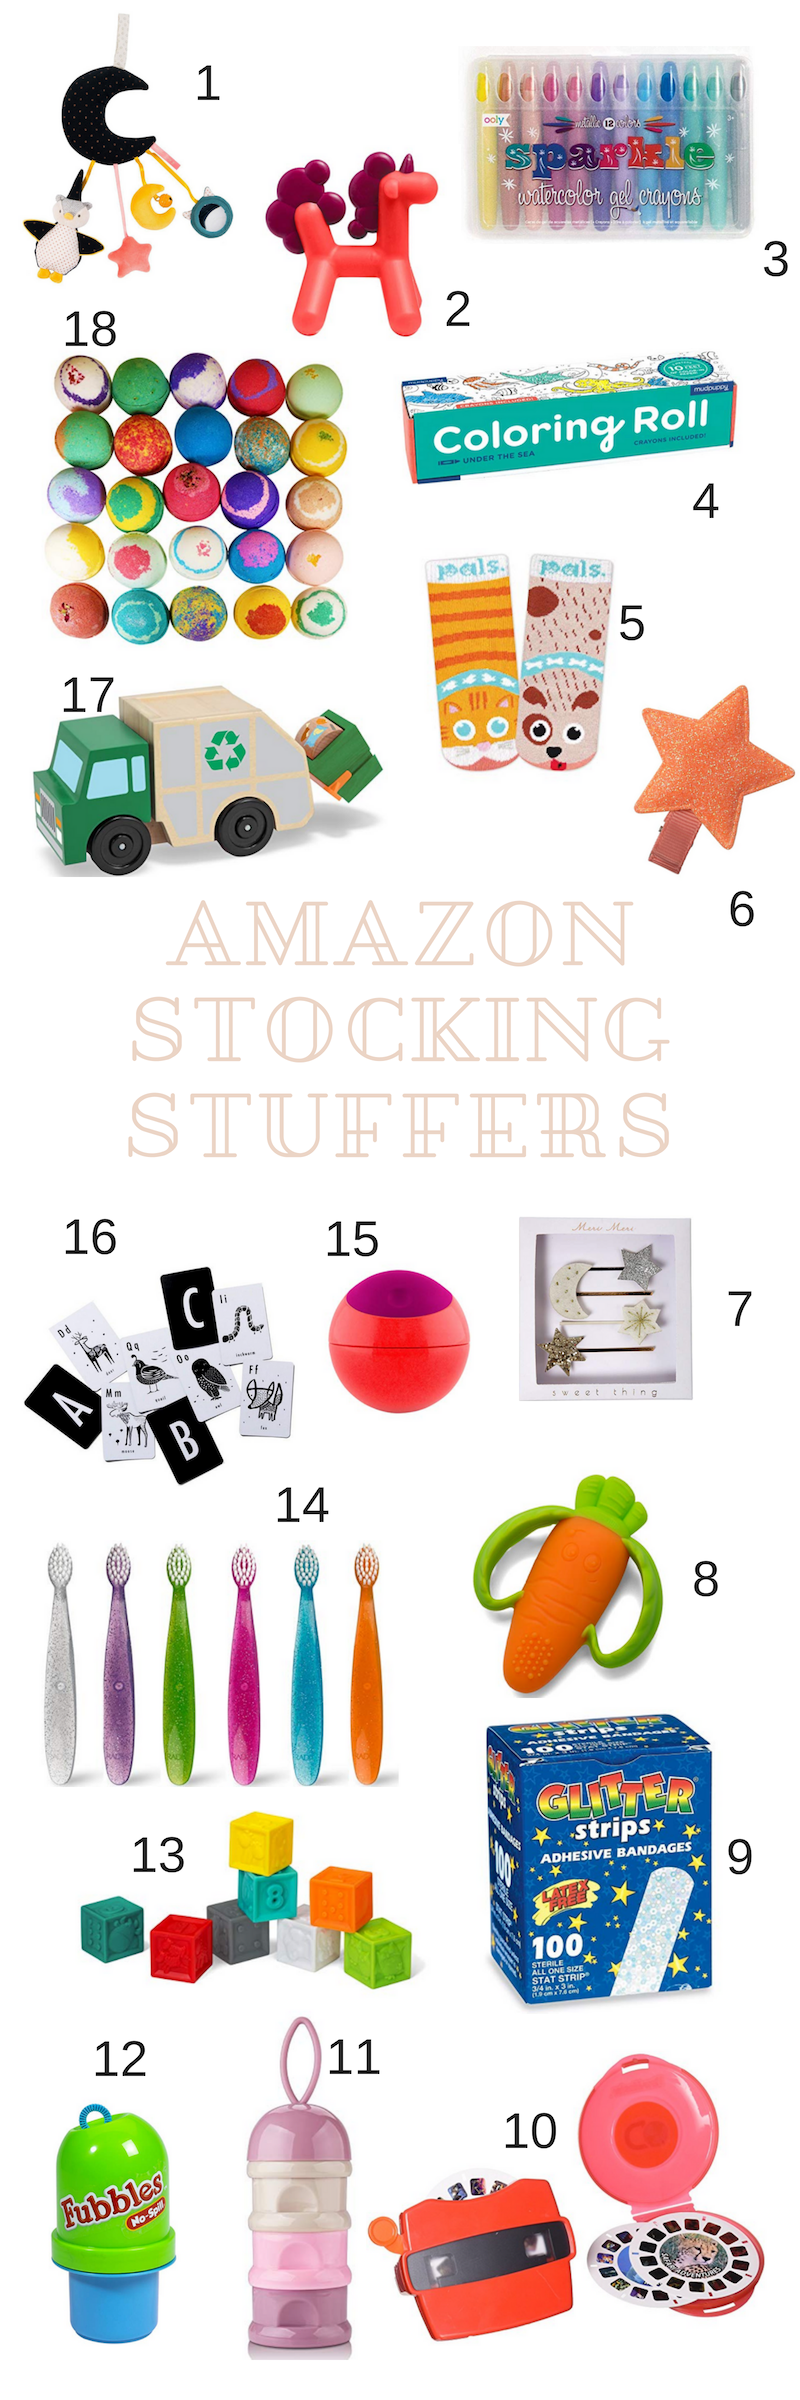 https://themamanotes.com/wp-content/uploads/2018/12/amazon-stocking-stuffers-for-kids.png